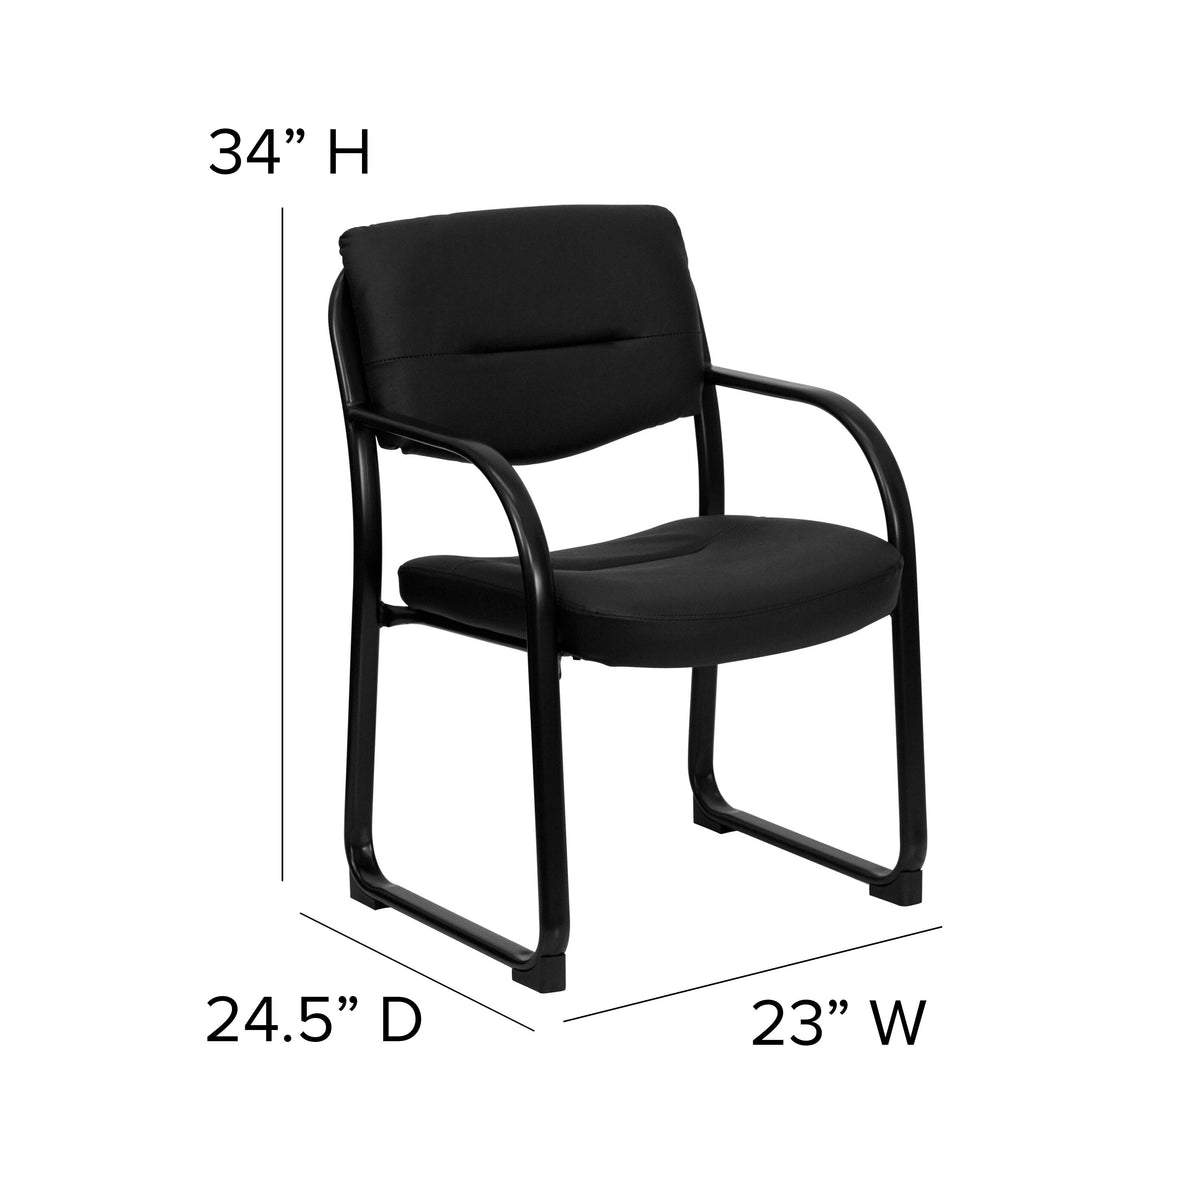 Black LeatherSoft Executive Reception Chair with Sled Base and Foam Padded Seat